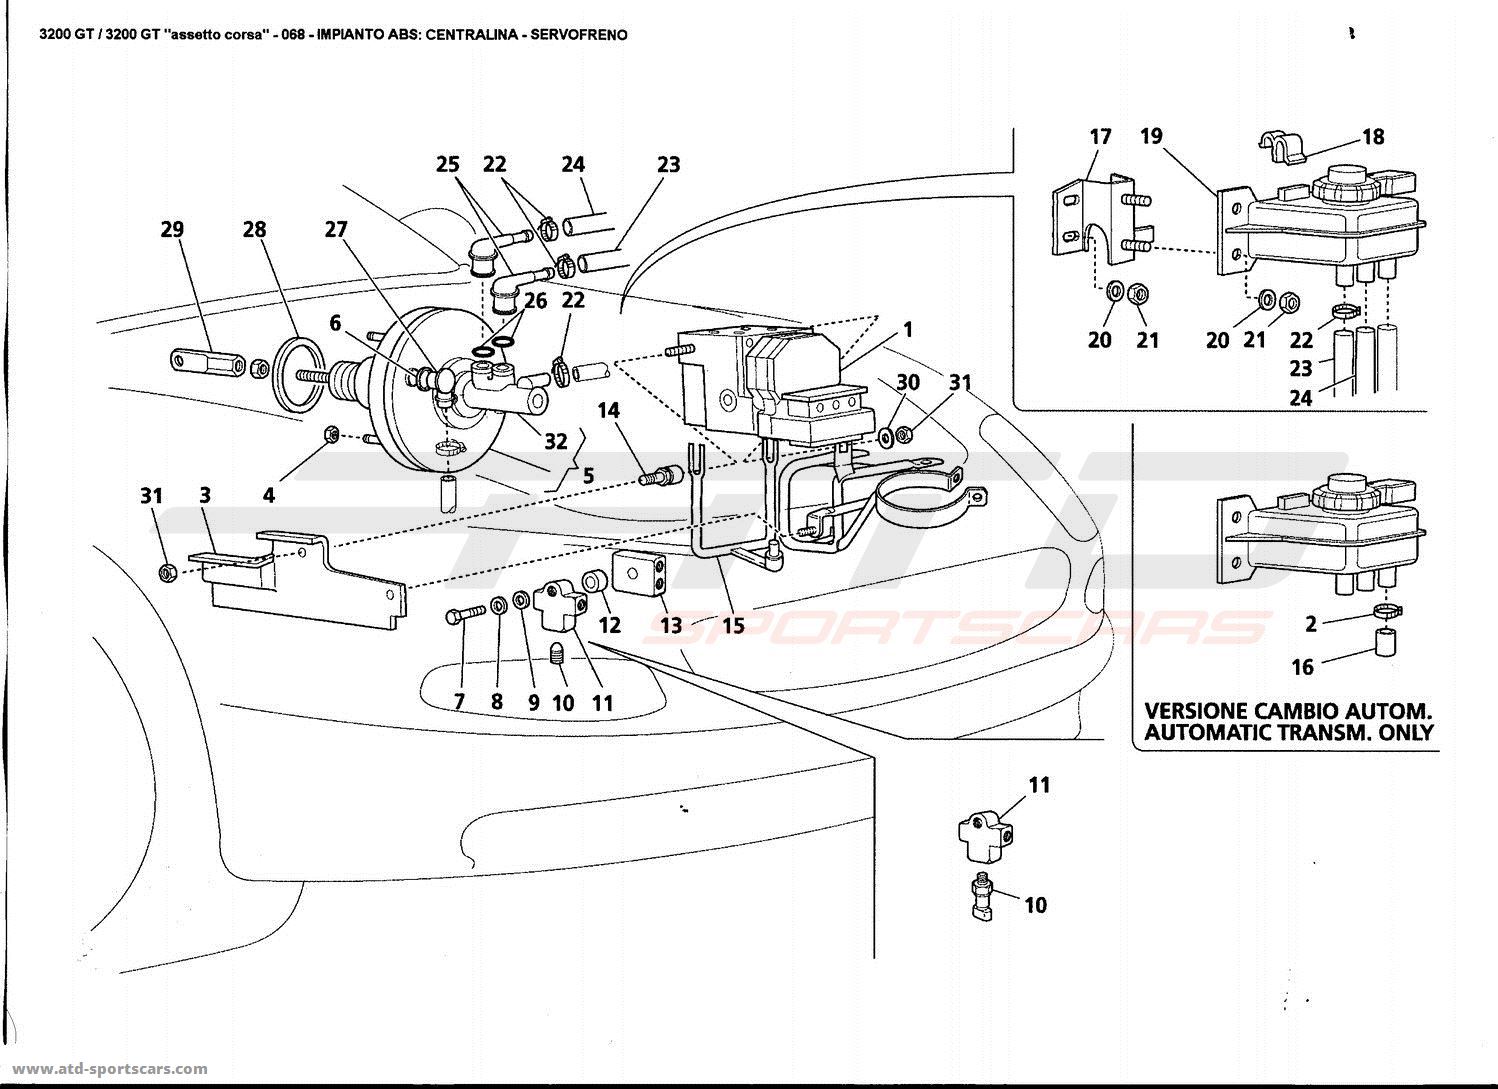 ABS SYSTEM: CONTROL UNIT - BRAKE BOOSTER